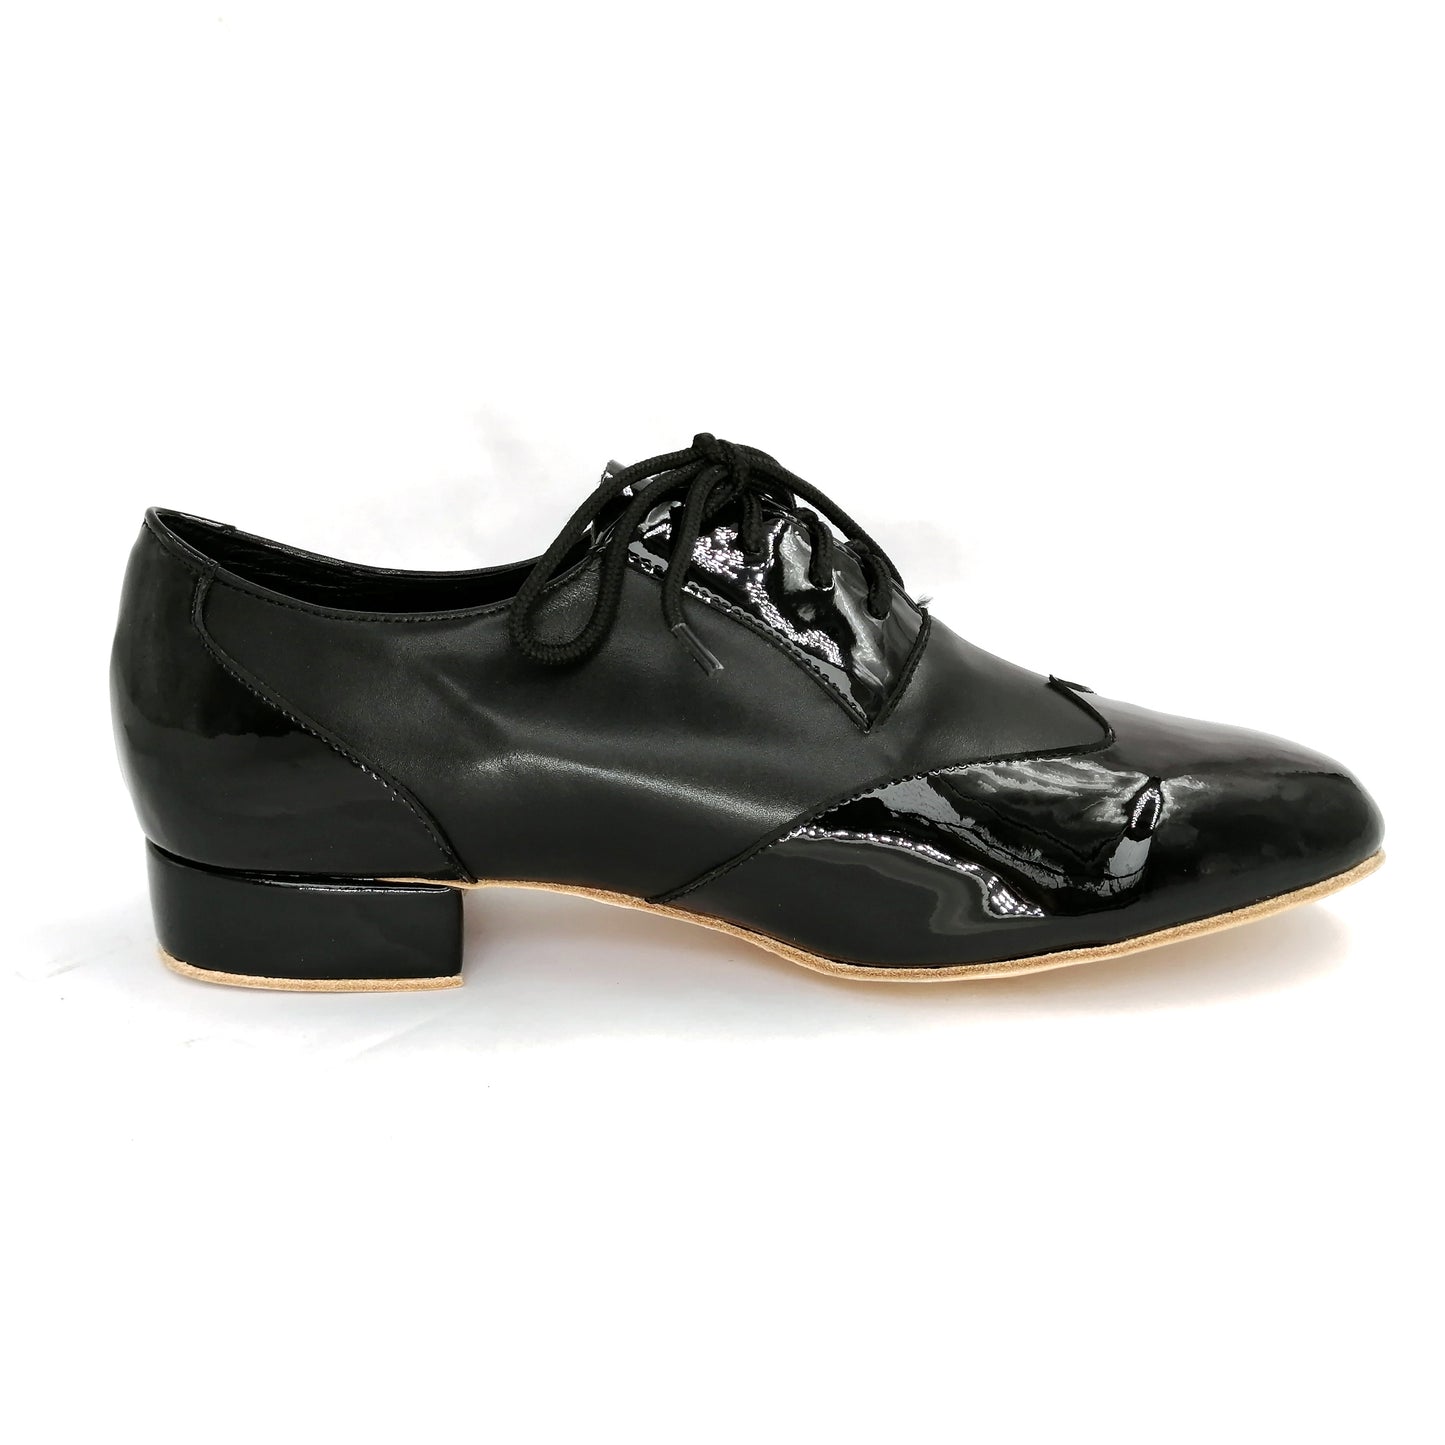 Pro Dancer Tango Shoes Mens Leather Sole 1 inch Heel Lace-up Black (PD-1005B)